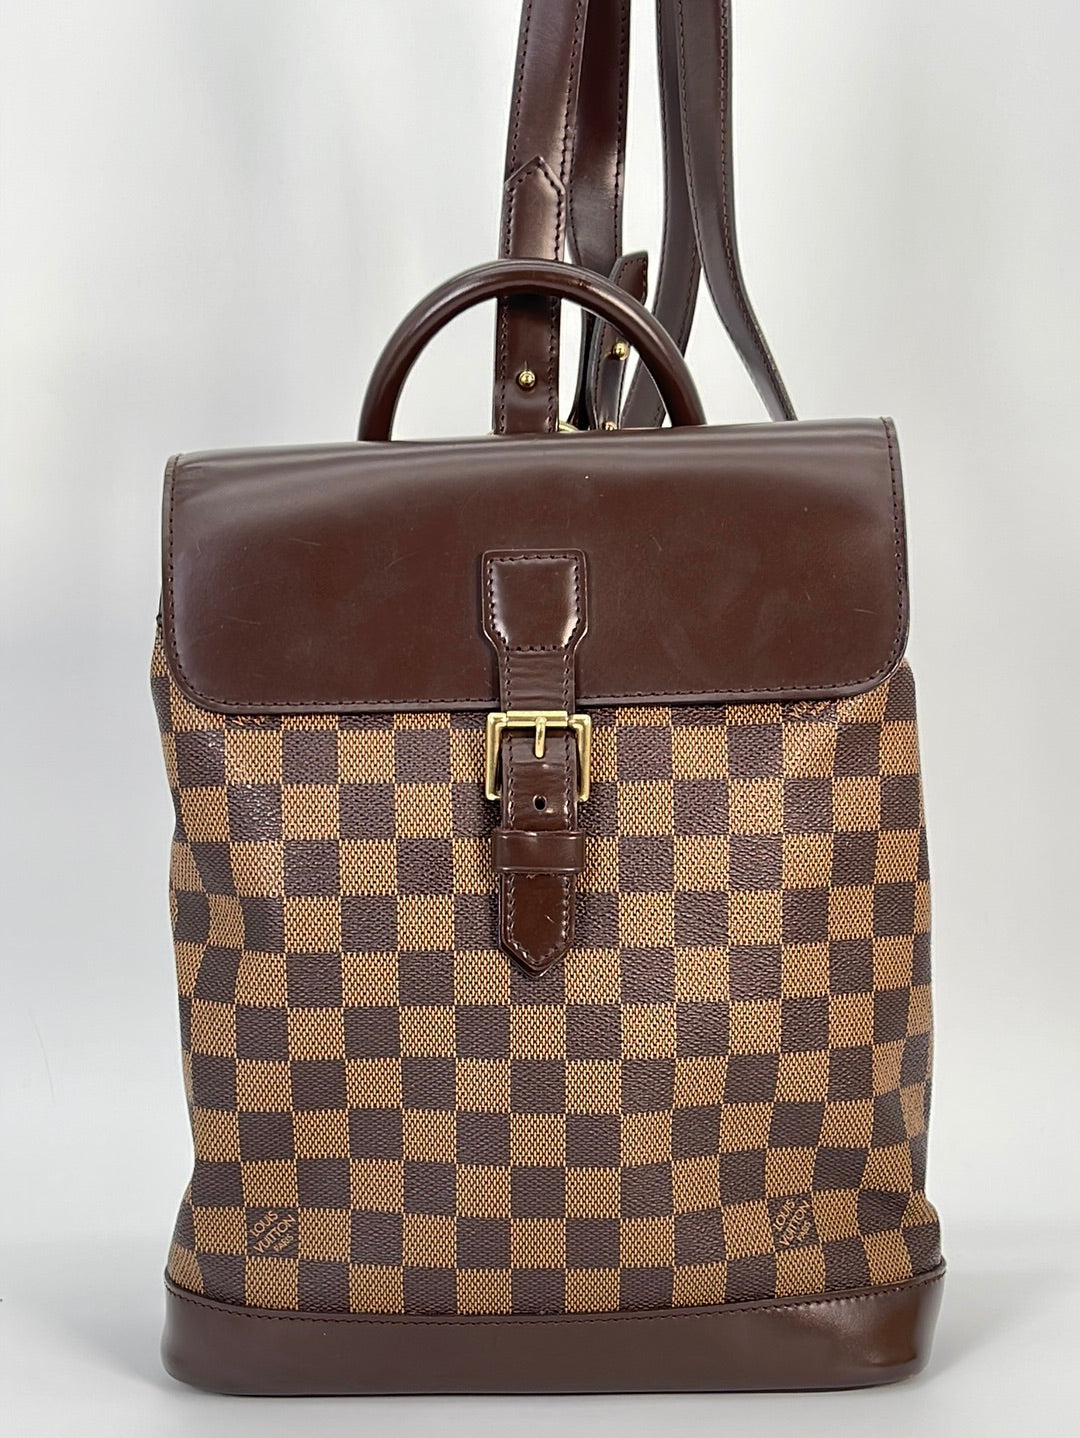 You Need Checkerboard Patterned Everything Right Now  Louis vuitton  backpack, Louis vuitton handbags, Louis vuitton bag